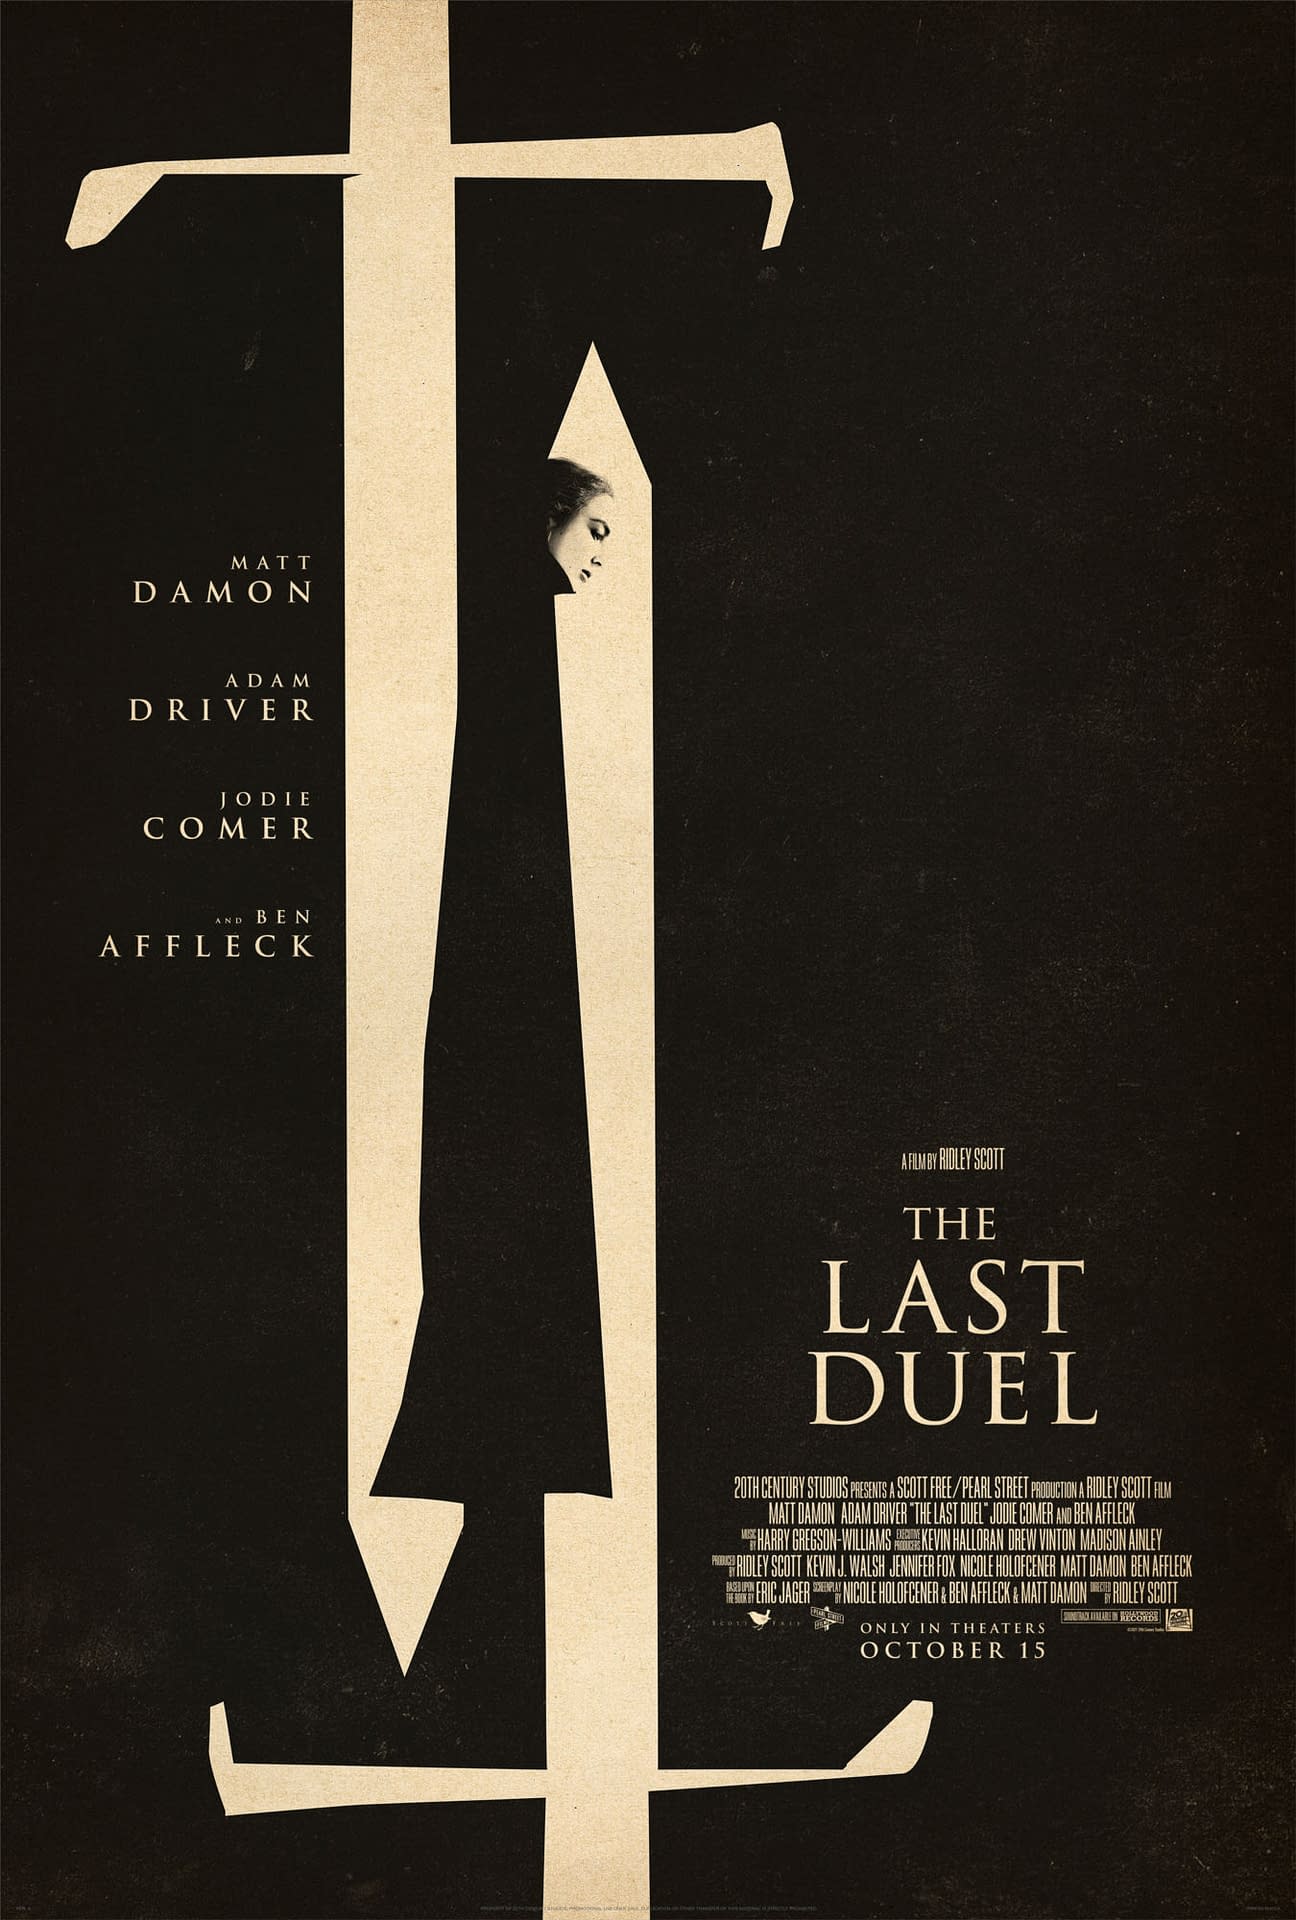 The True Story Behind Ridley Scott's The Last Duel